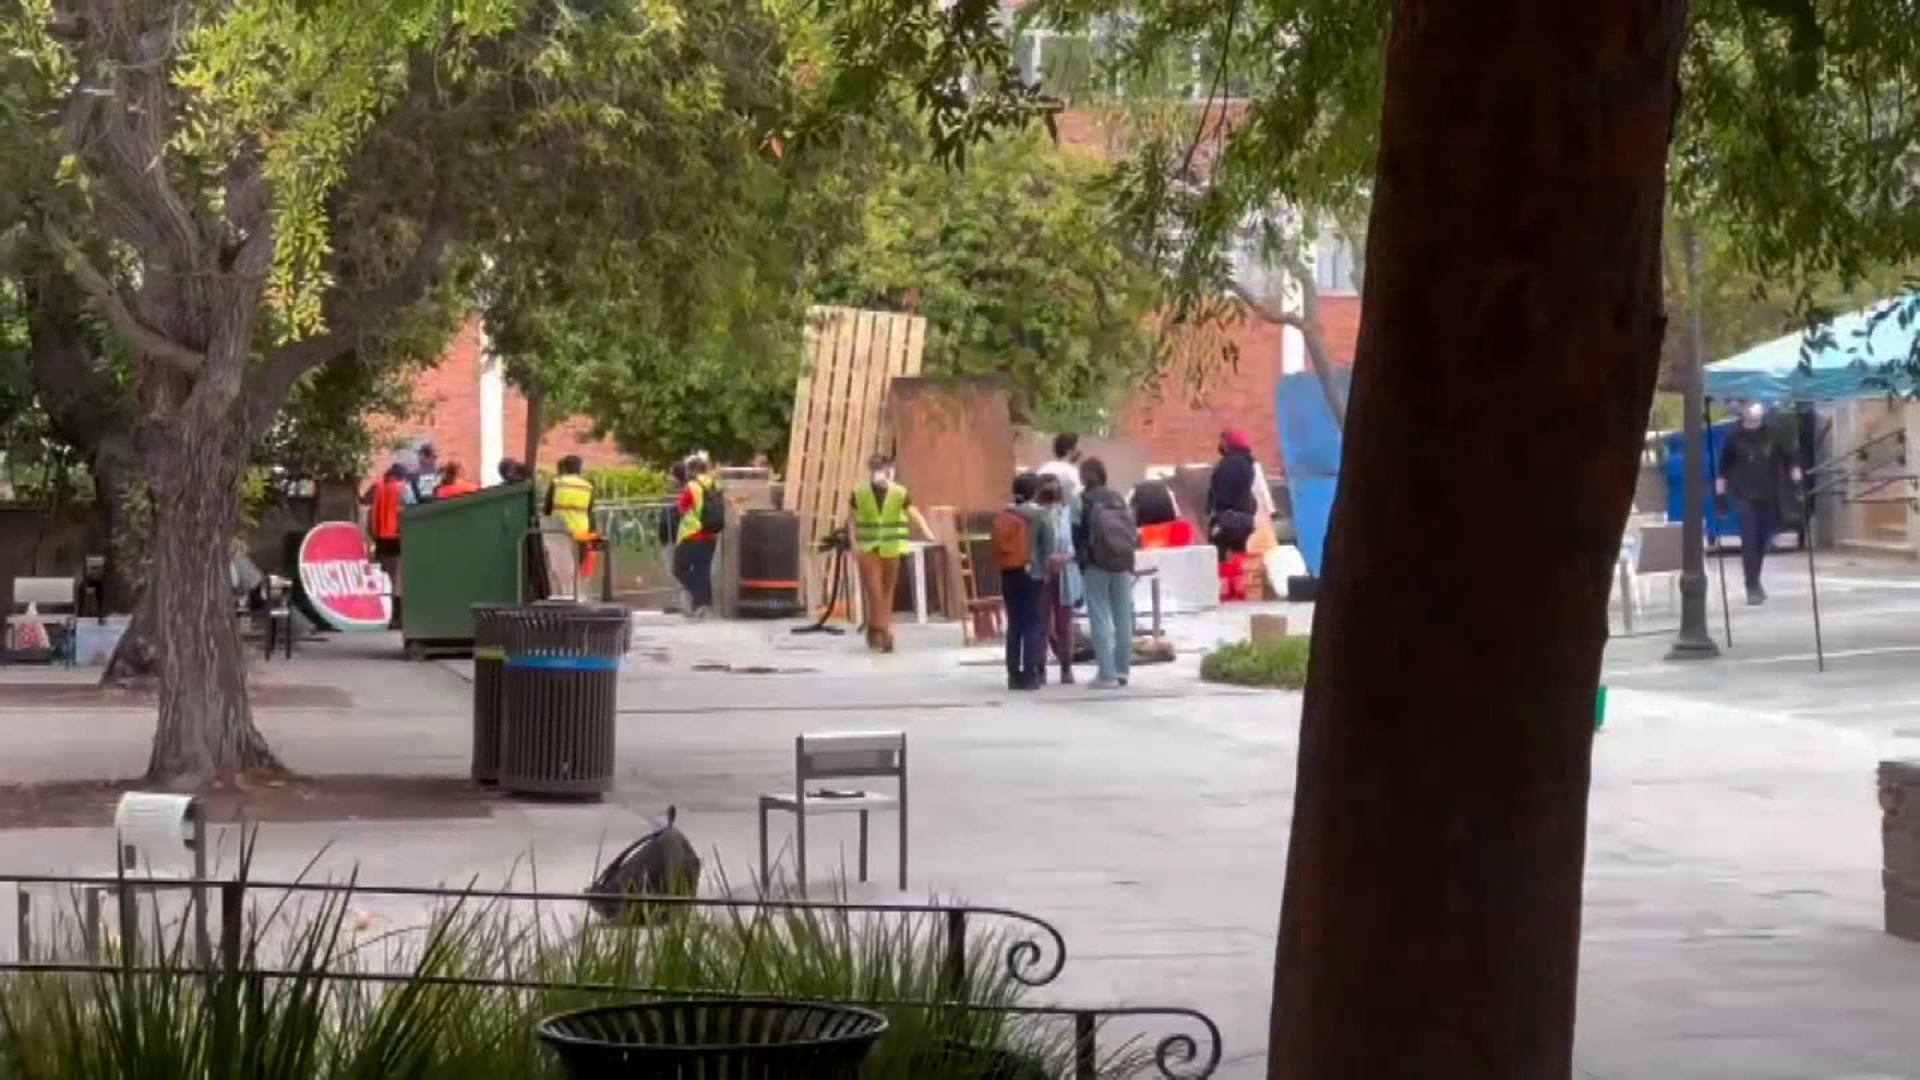 A screengrab from a video shows a barricade set up by protesters today on UCLA’s campus in Los Angeles, CA.